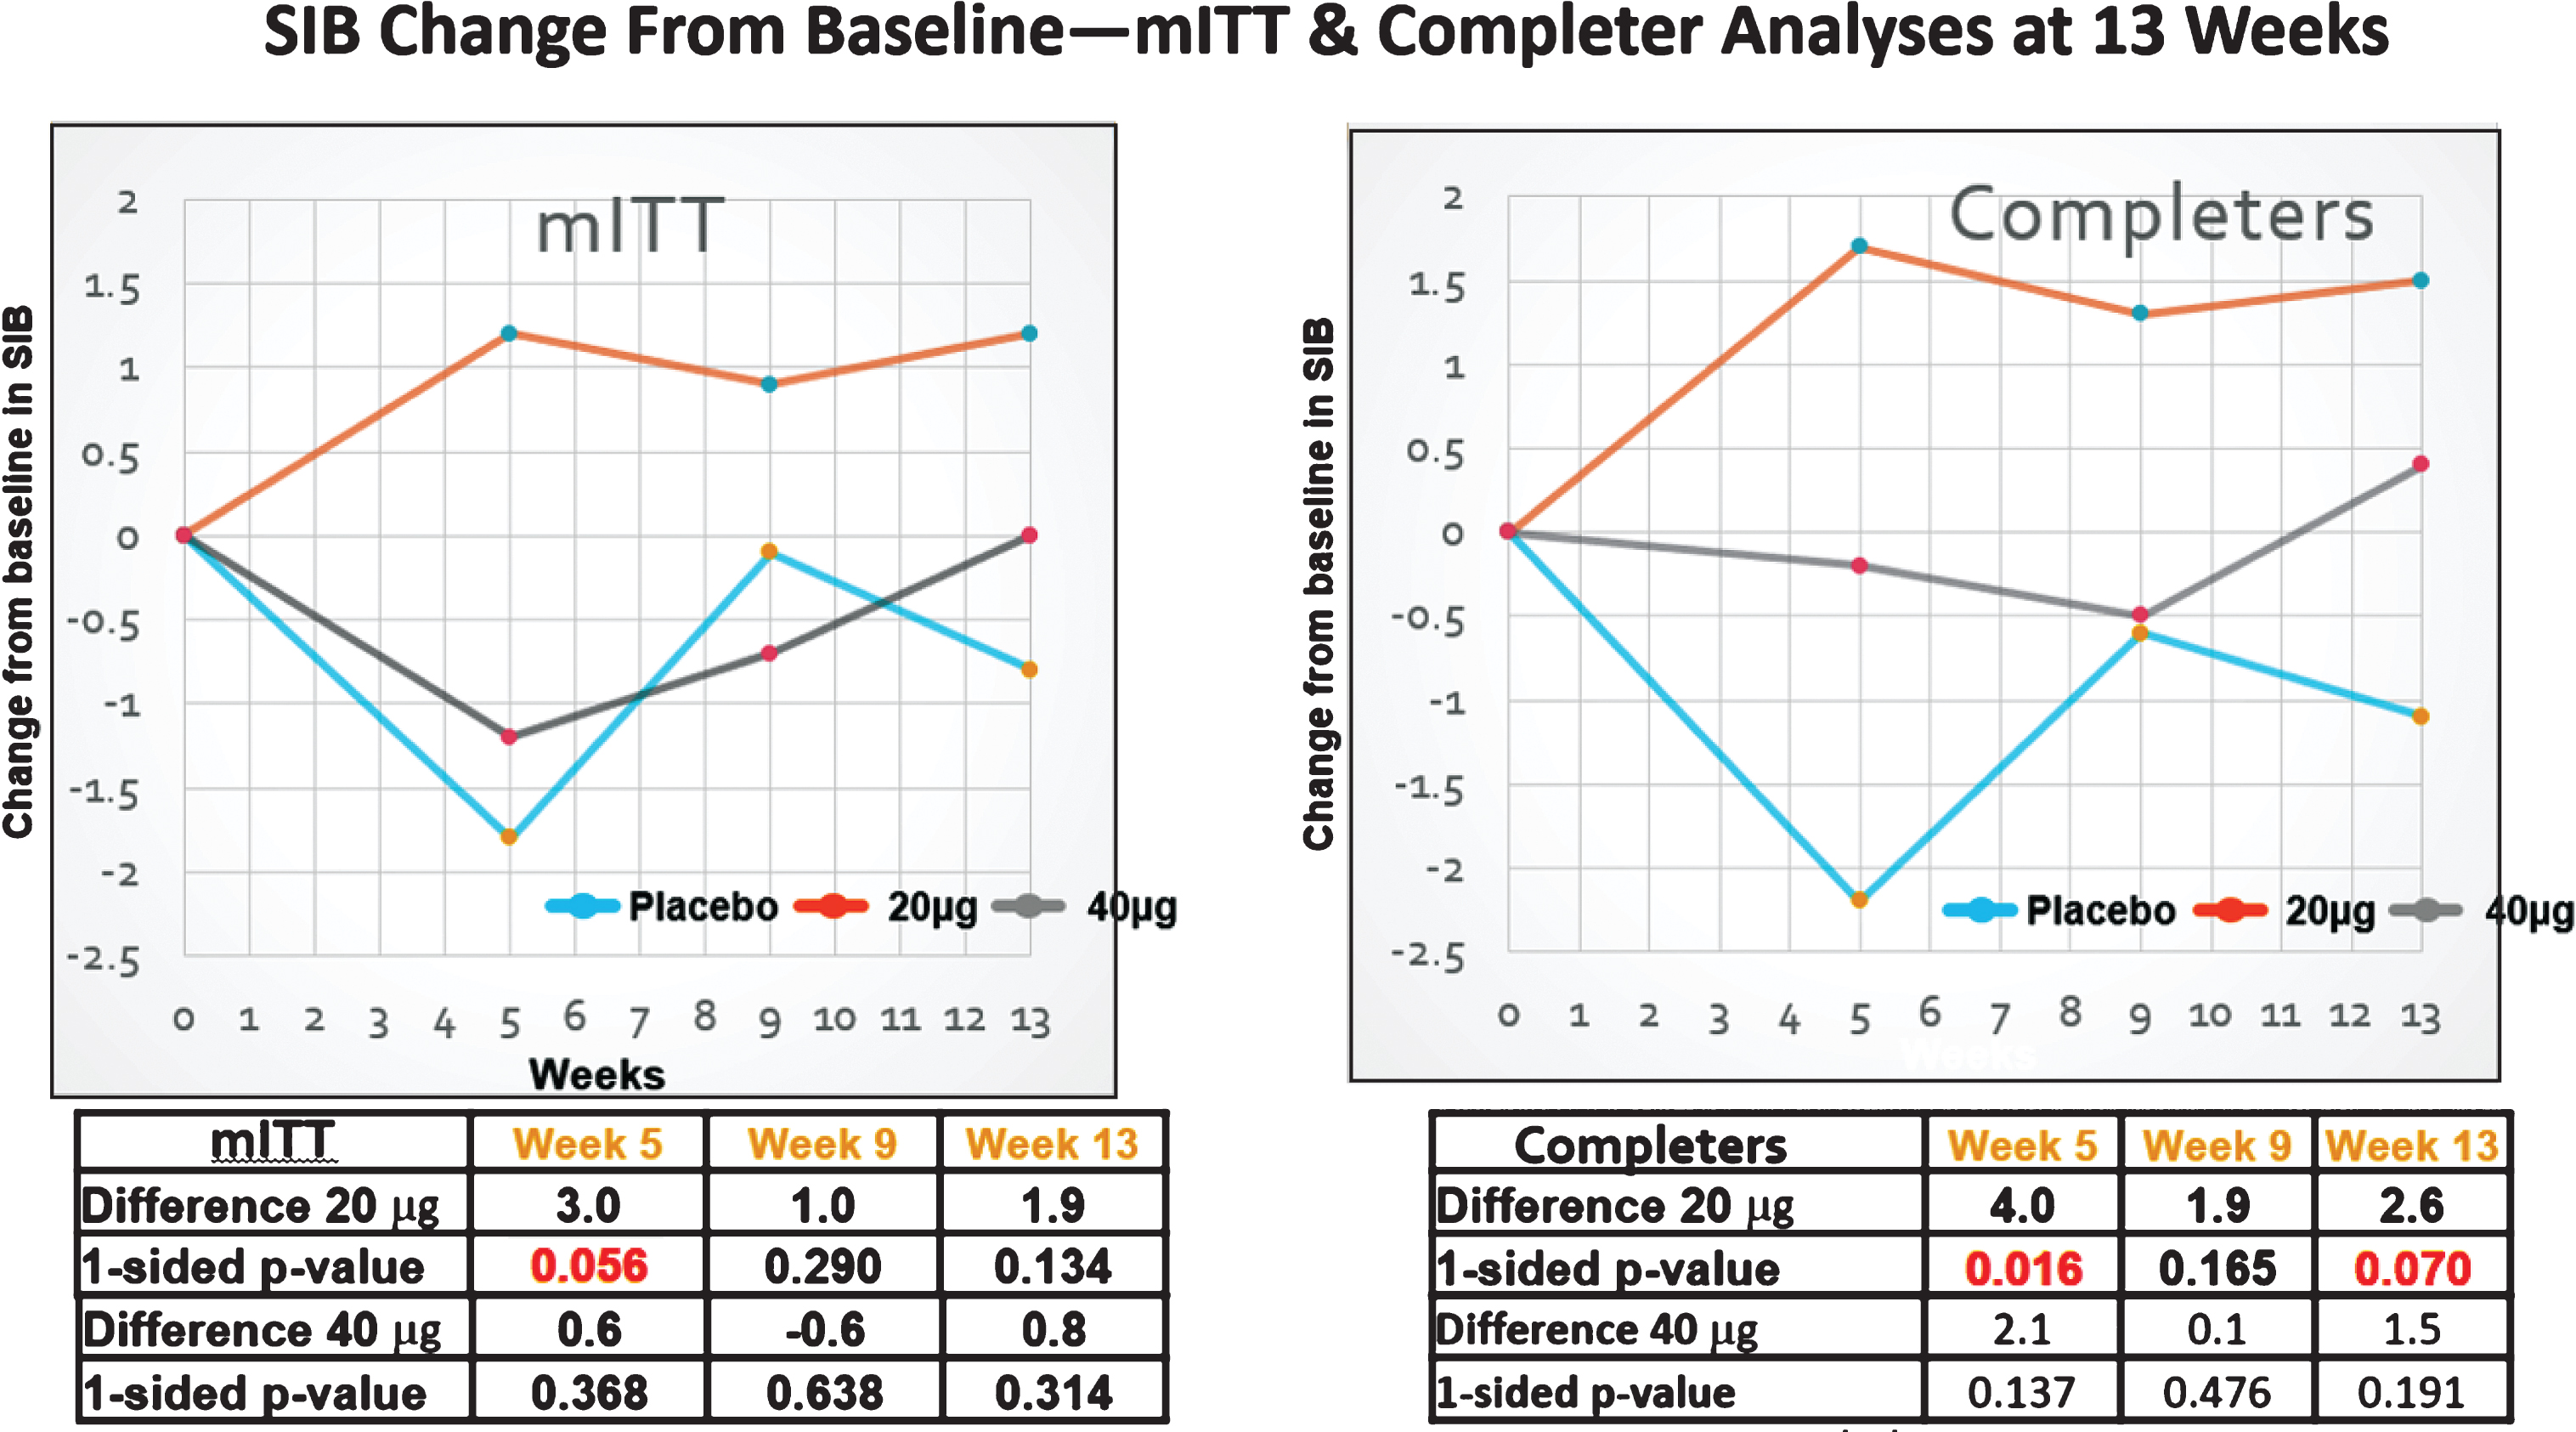 SIB changes in the MITT (FAS) and completers sets. Clear improvement signals in the SIB were only observed with the 20 μg dosing protocol.